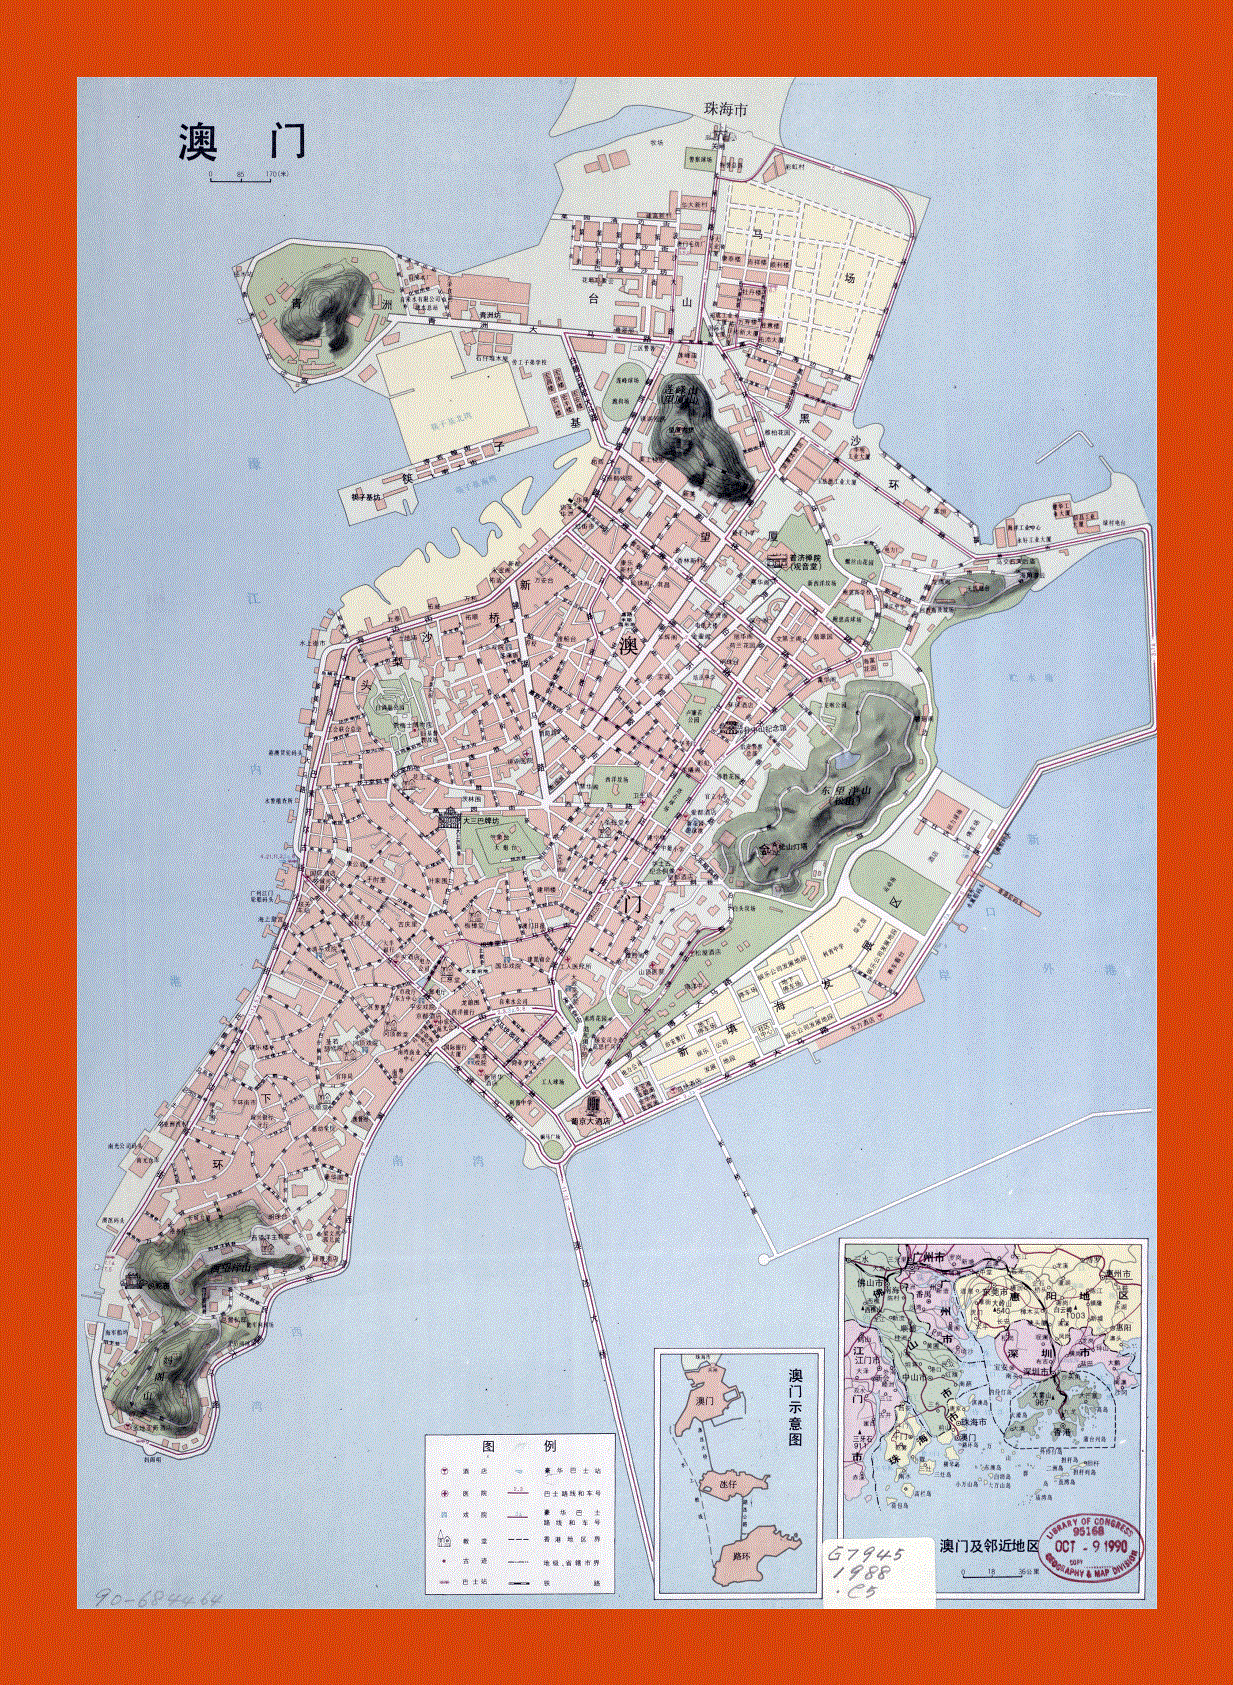 Road map of Macau in chinese - 1988